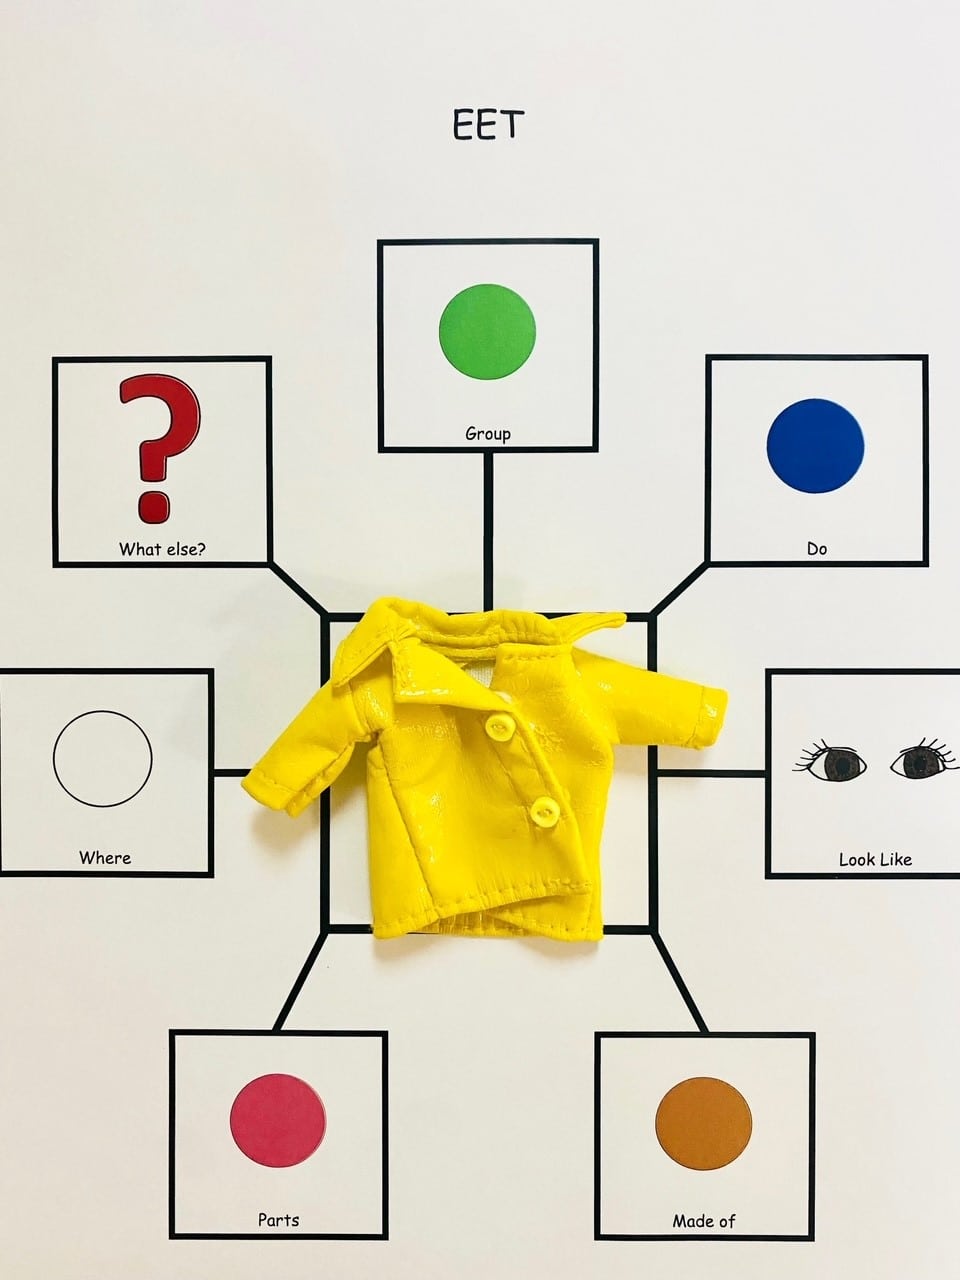 Pictured is an EET semantic map. A yellow rain coat is placed in the middle of the semantic map to help students have a visual model of the object the therapist wants the student to describe. 